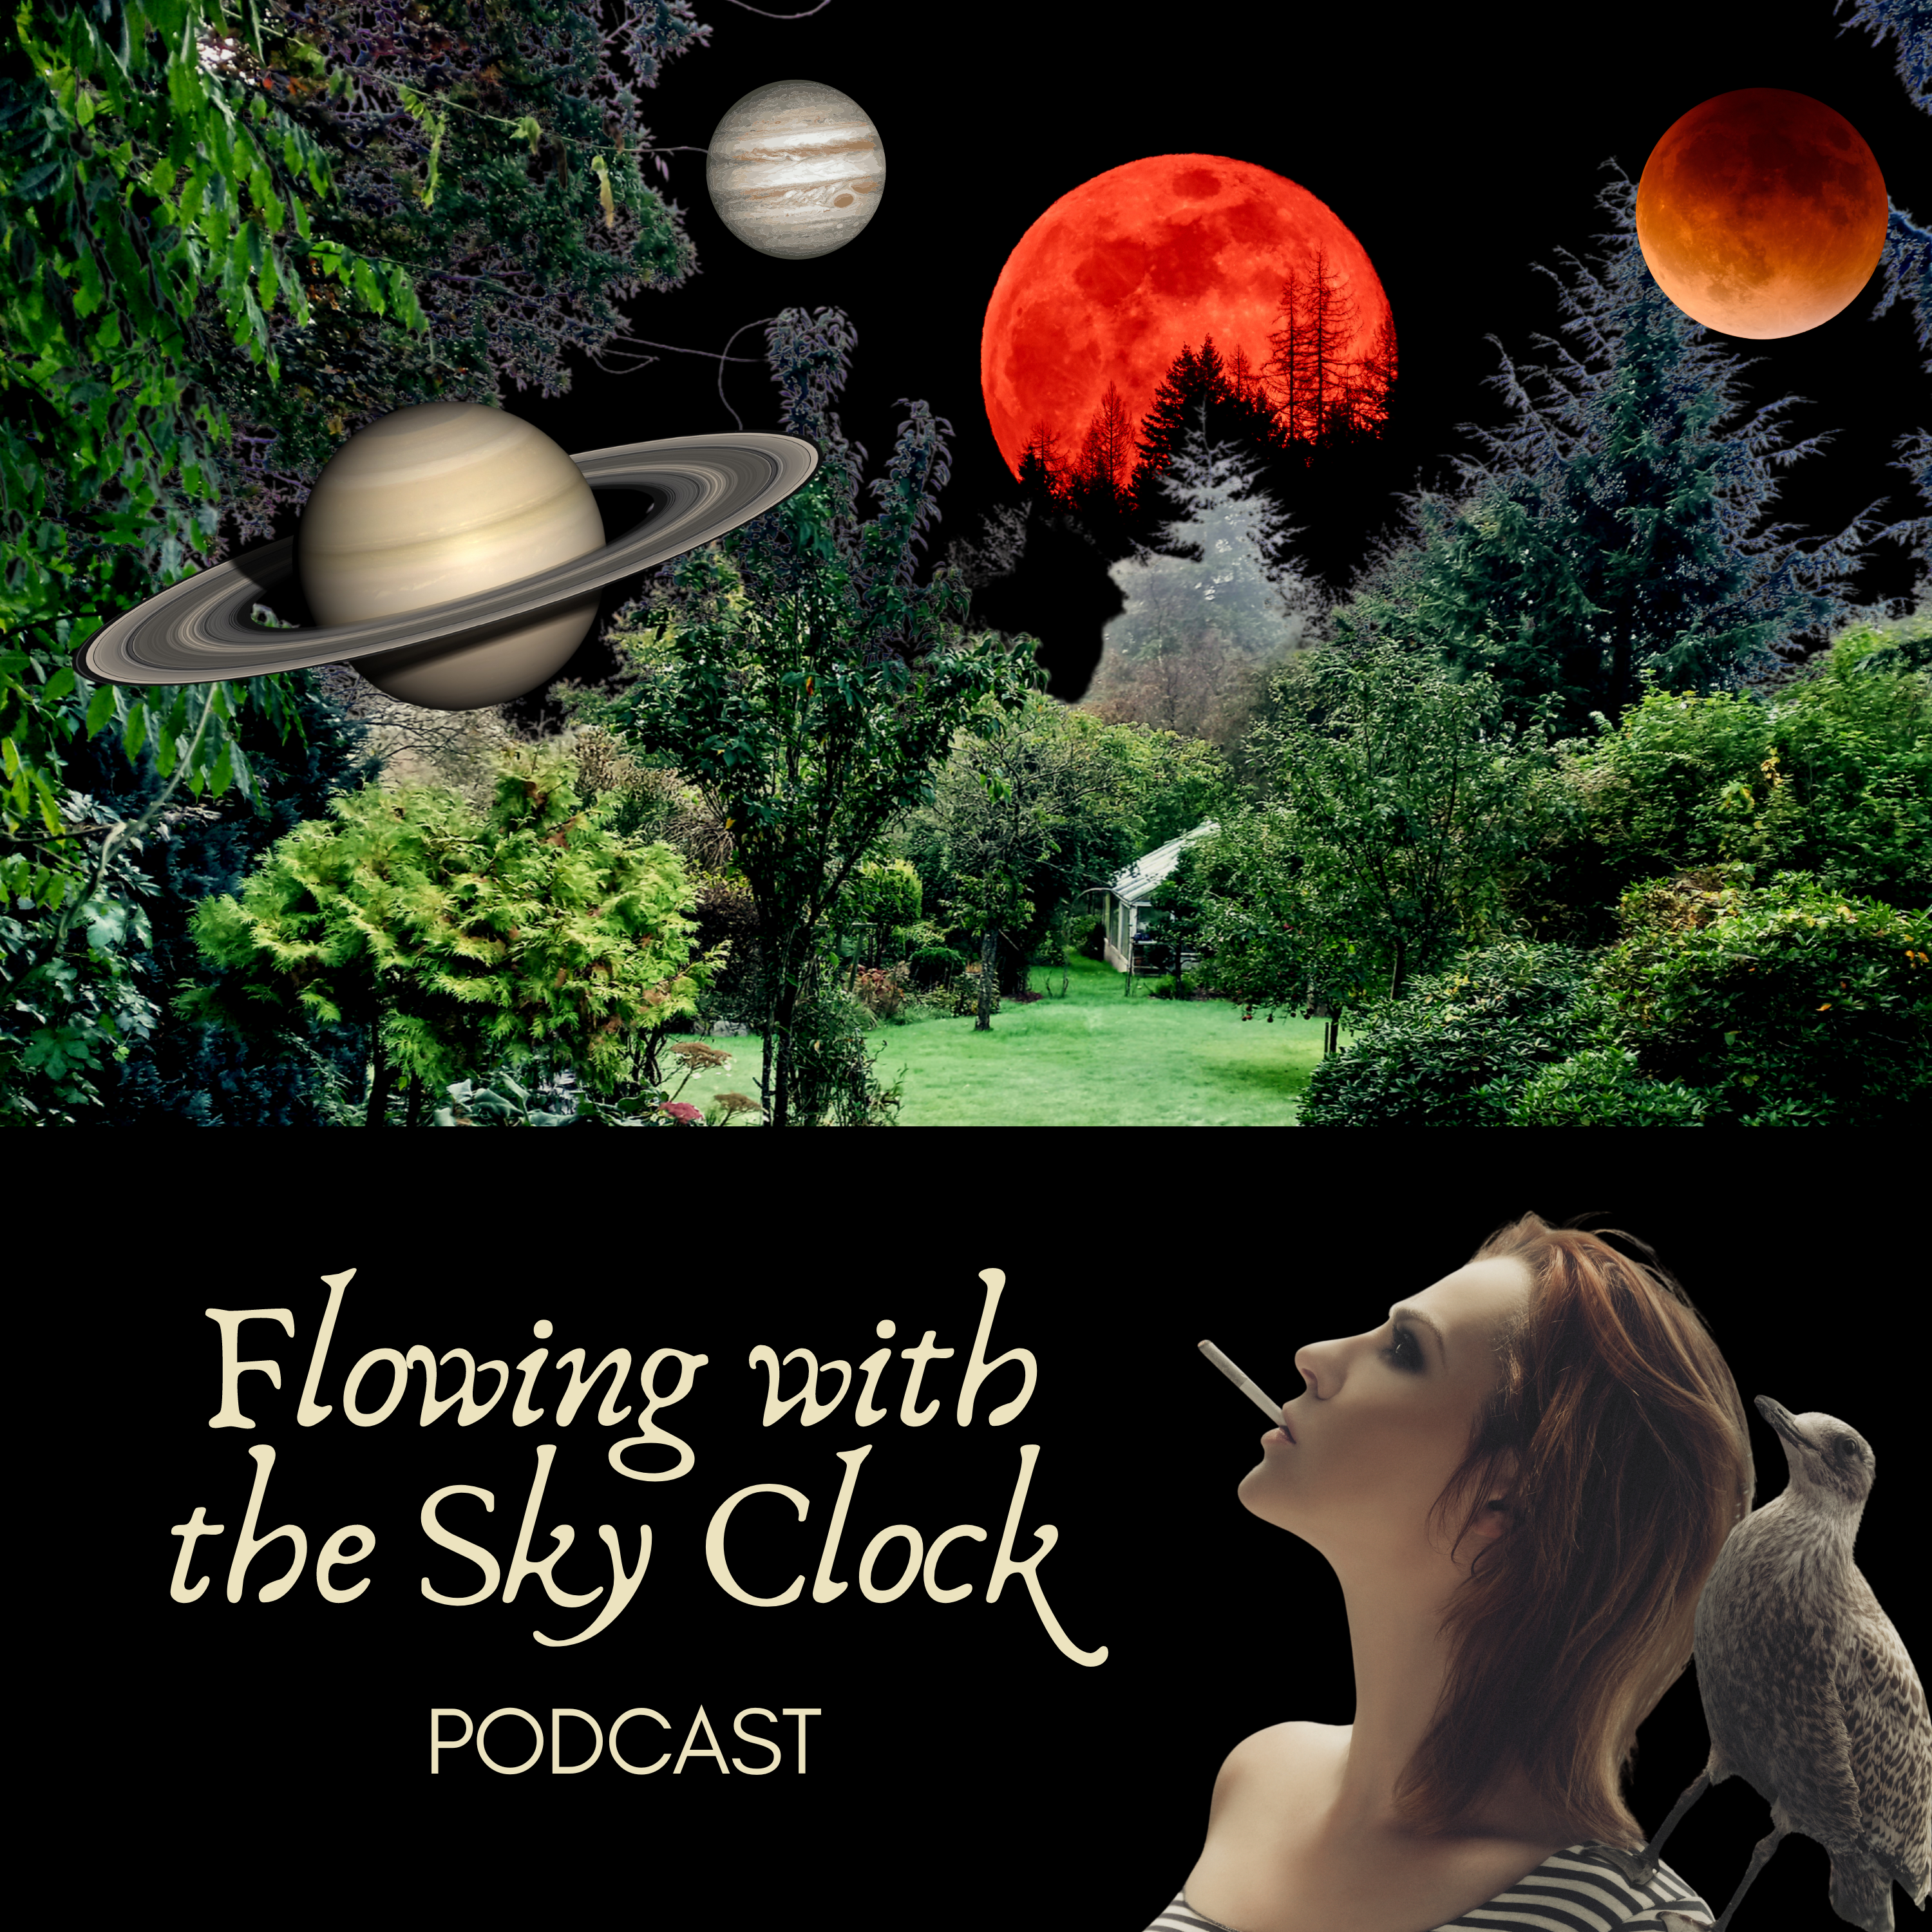 Flowing with the Sky Clock Podcast